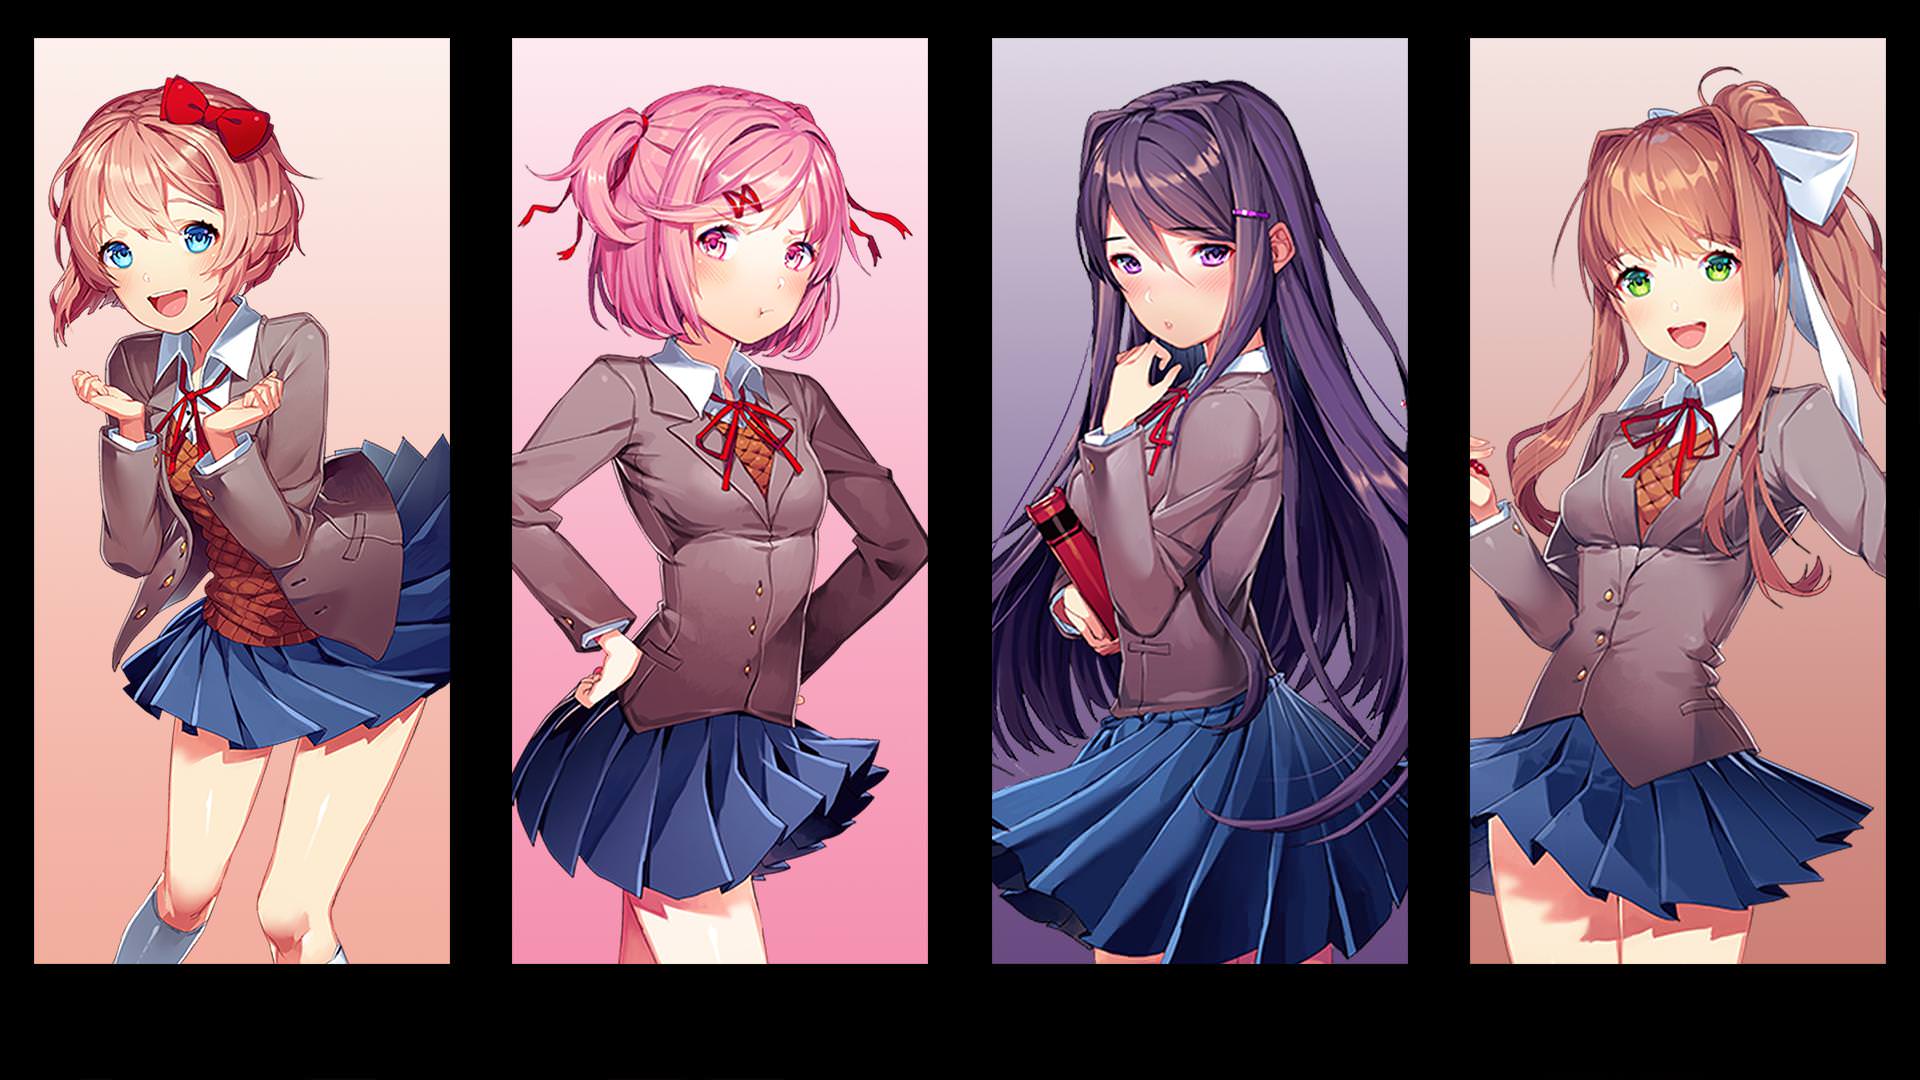 OC Made a DDLC wallpapers in the style of RWBY's posters. 